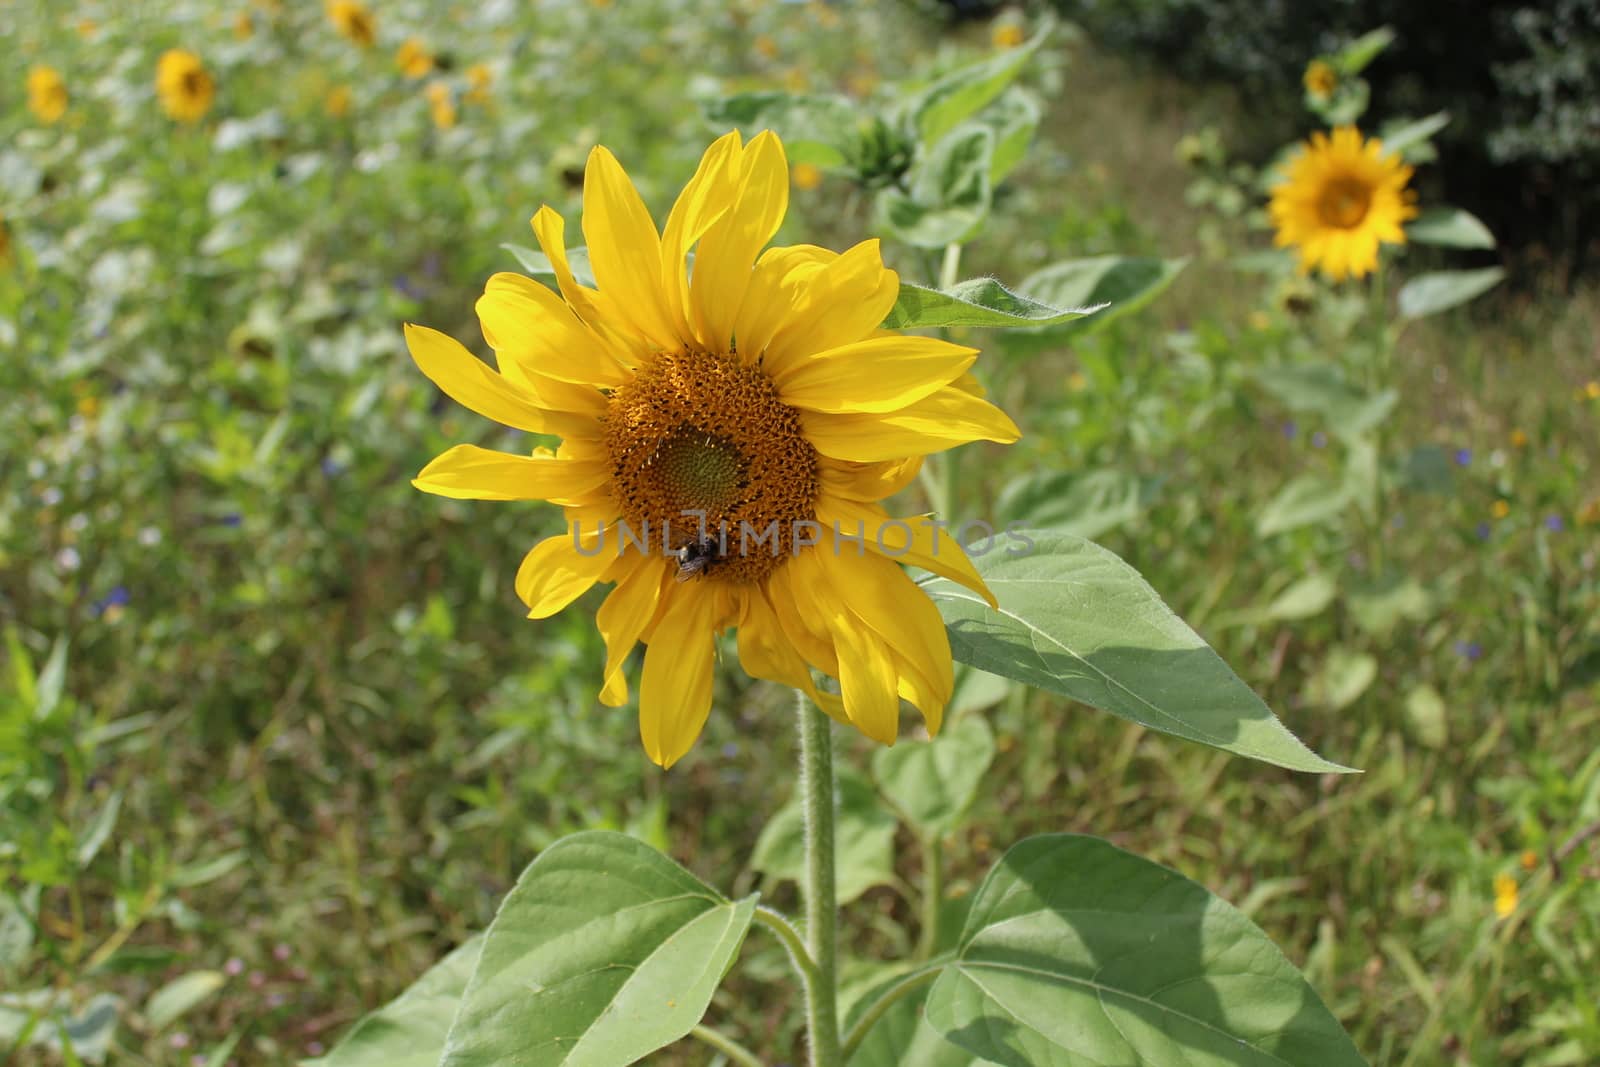 The picture shows beautiful sunflowers in the garden.